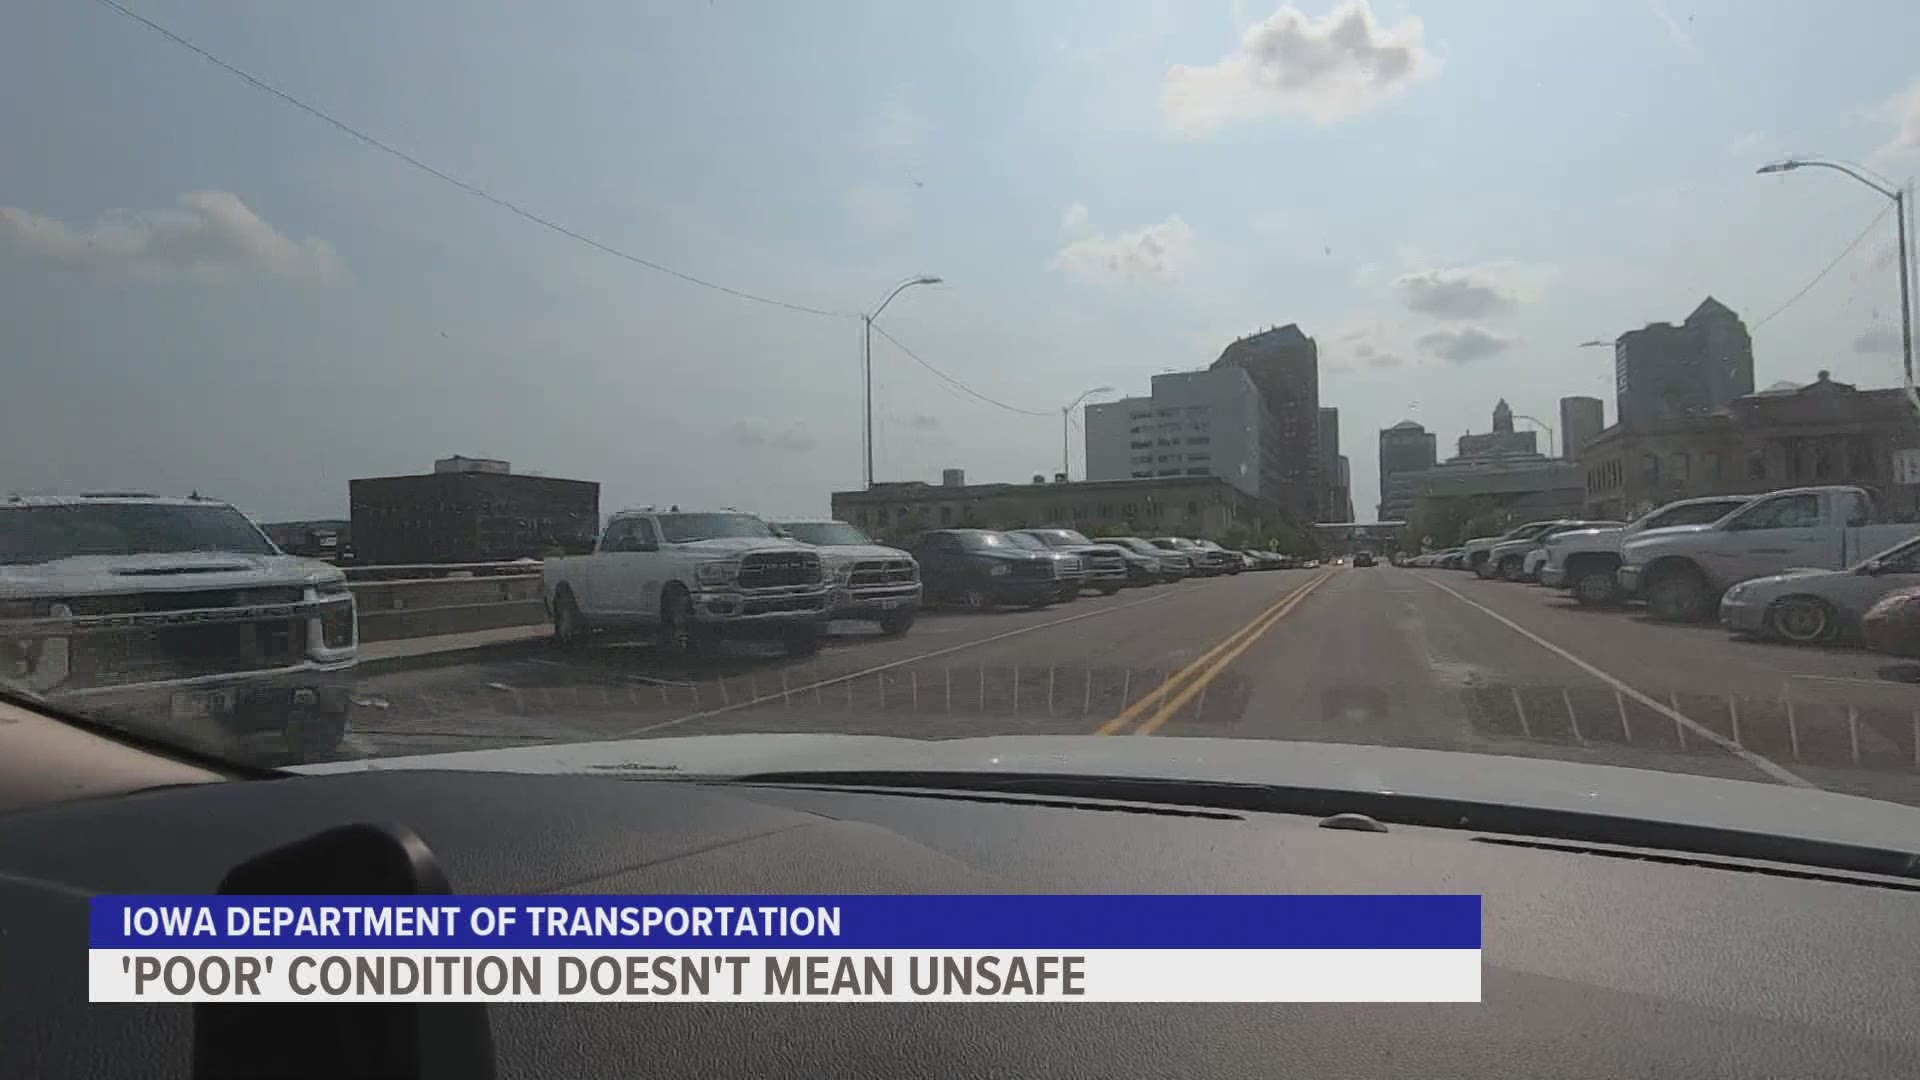 The Iowa Department of Transportation says the condition a road is in doesn't mean it's unsafe, just that it needs maintenance done soon.